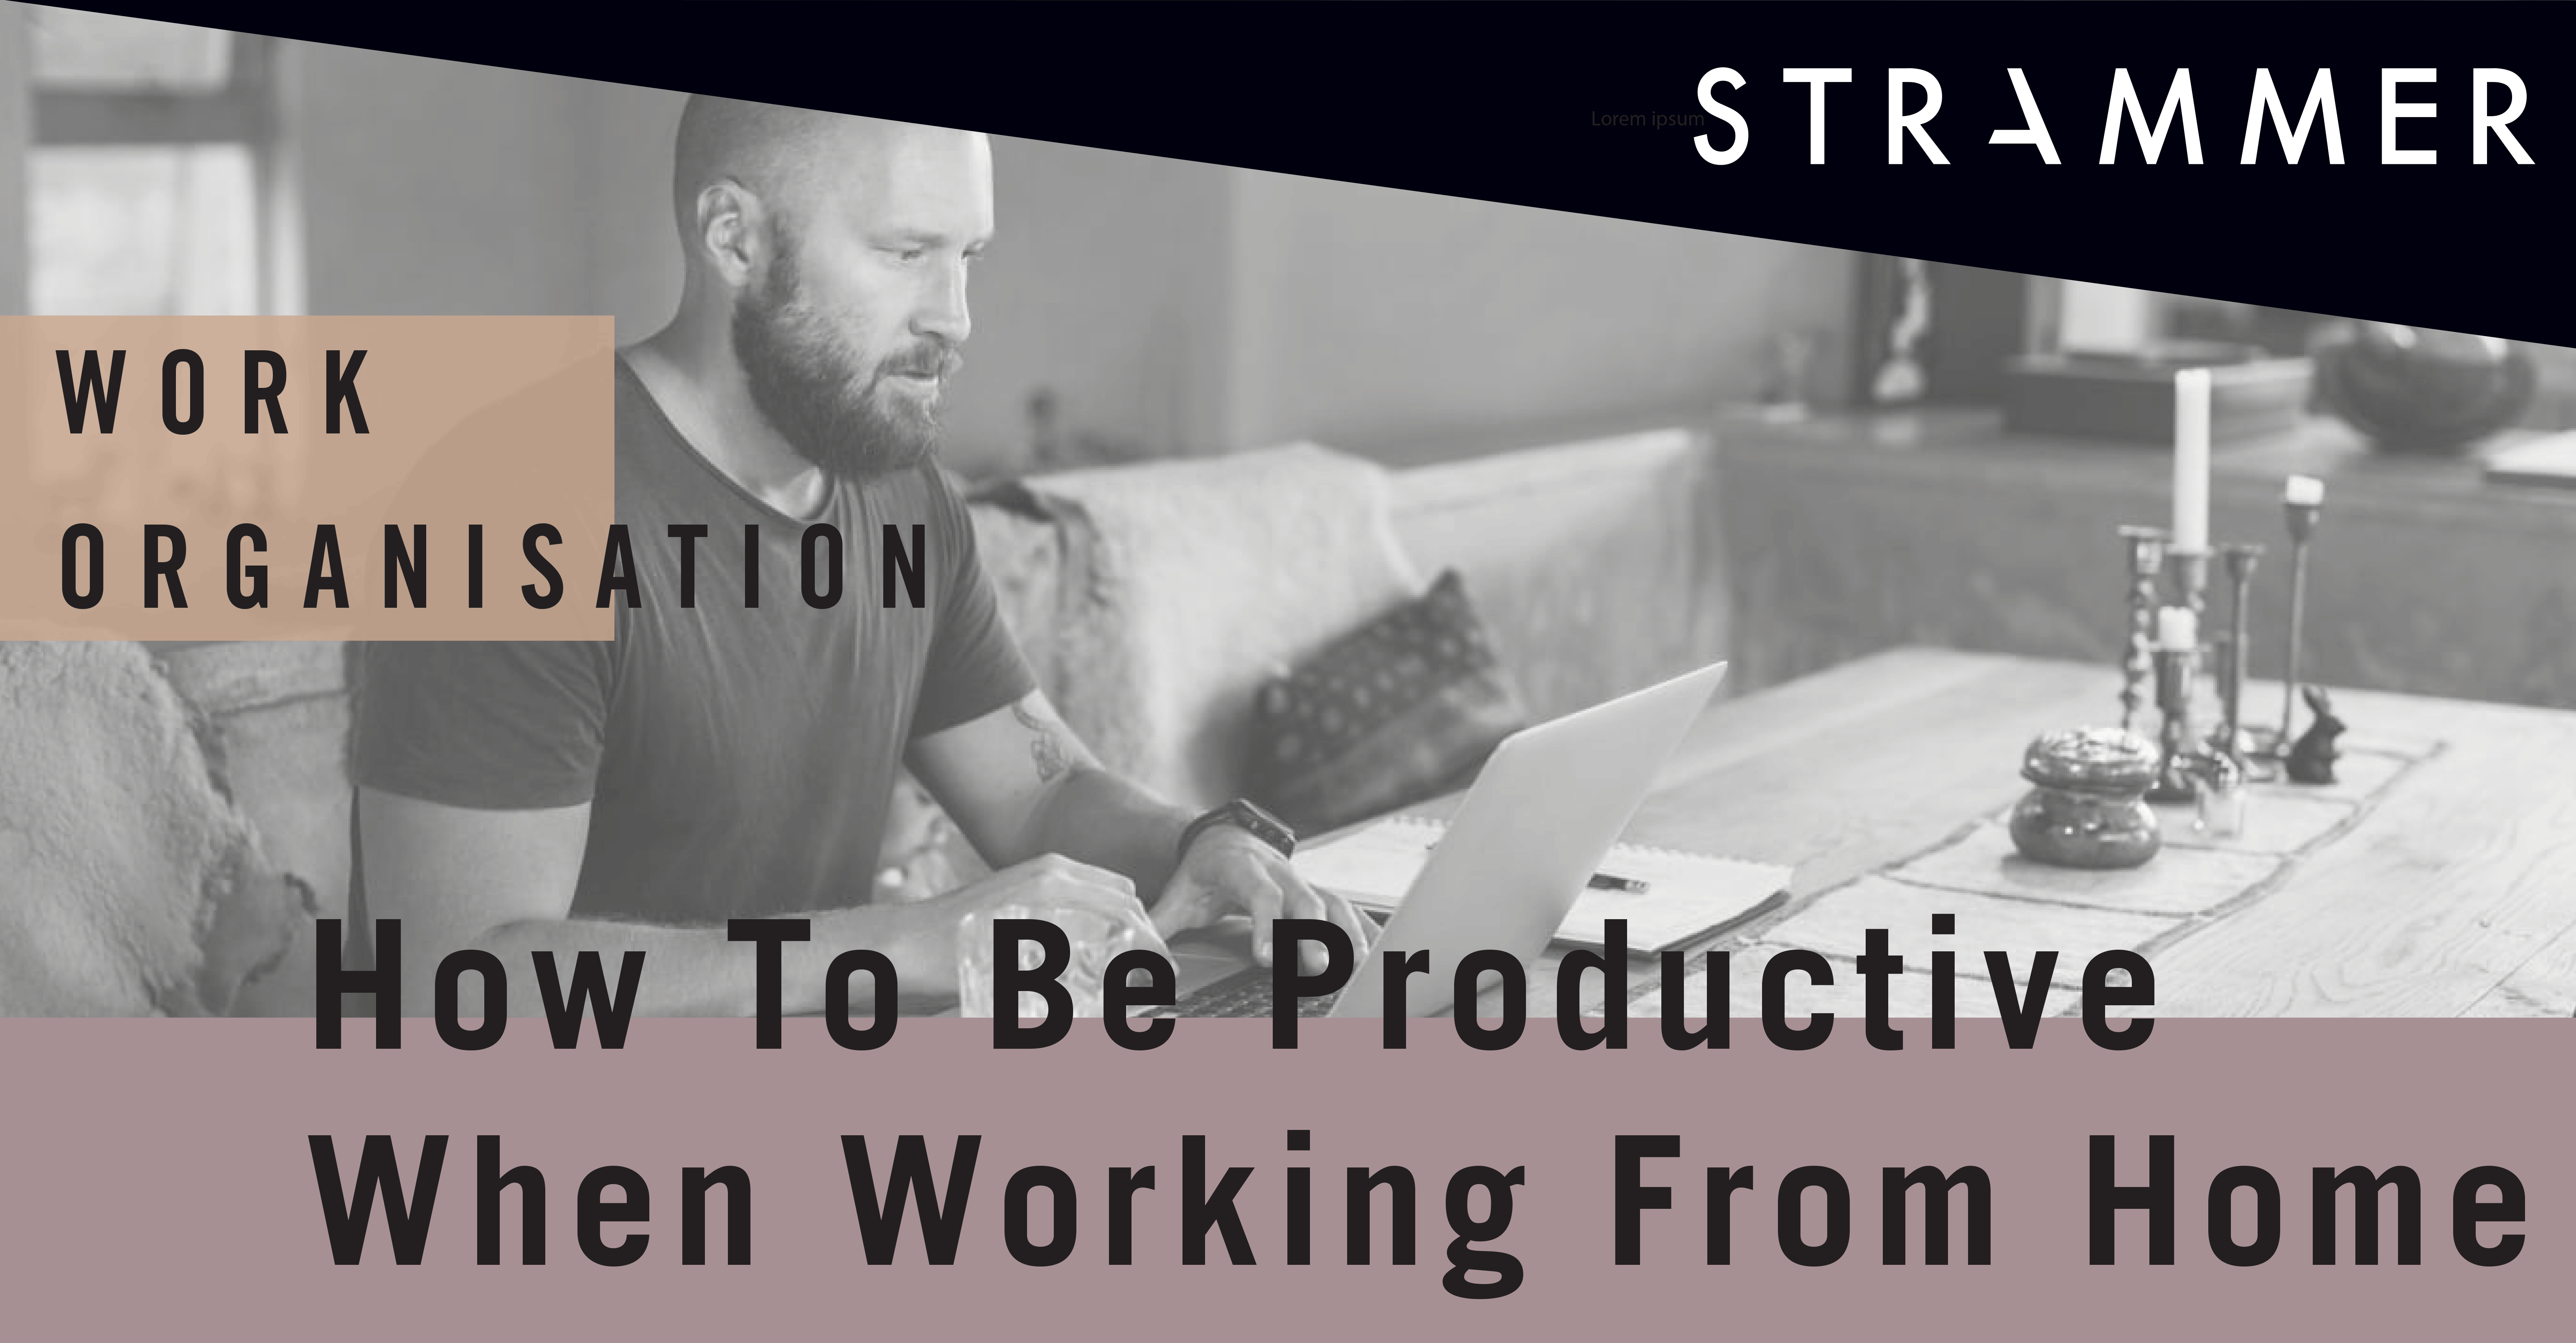 Working From Home: Is It Here To Stay?